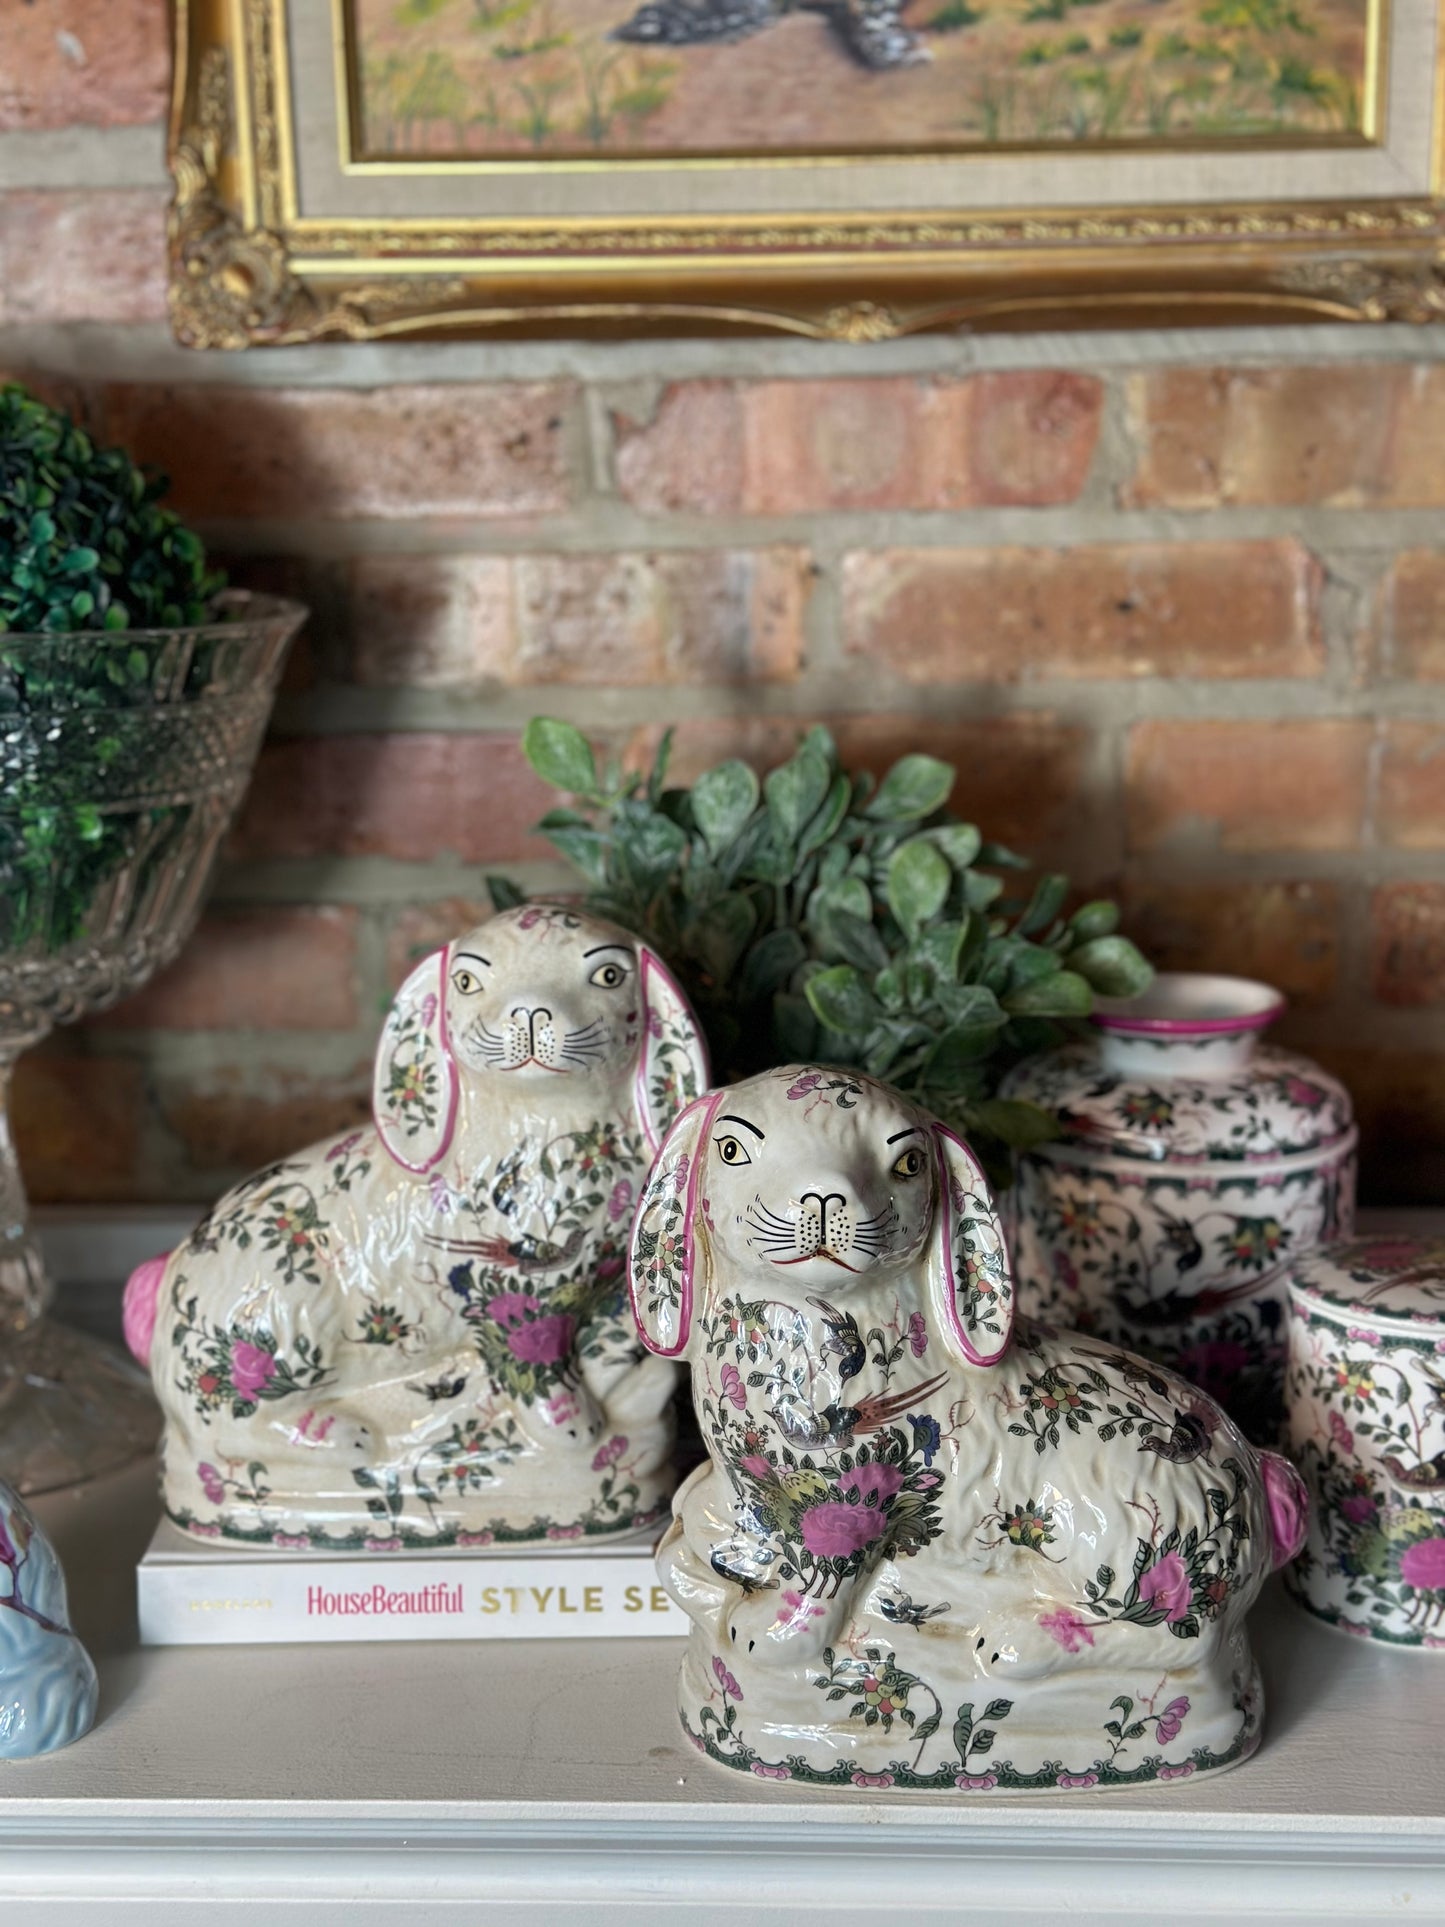 Staffordshire-Style Bunny Hares, Rose Medallion Pair, 8L X 4W X 8H